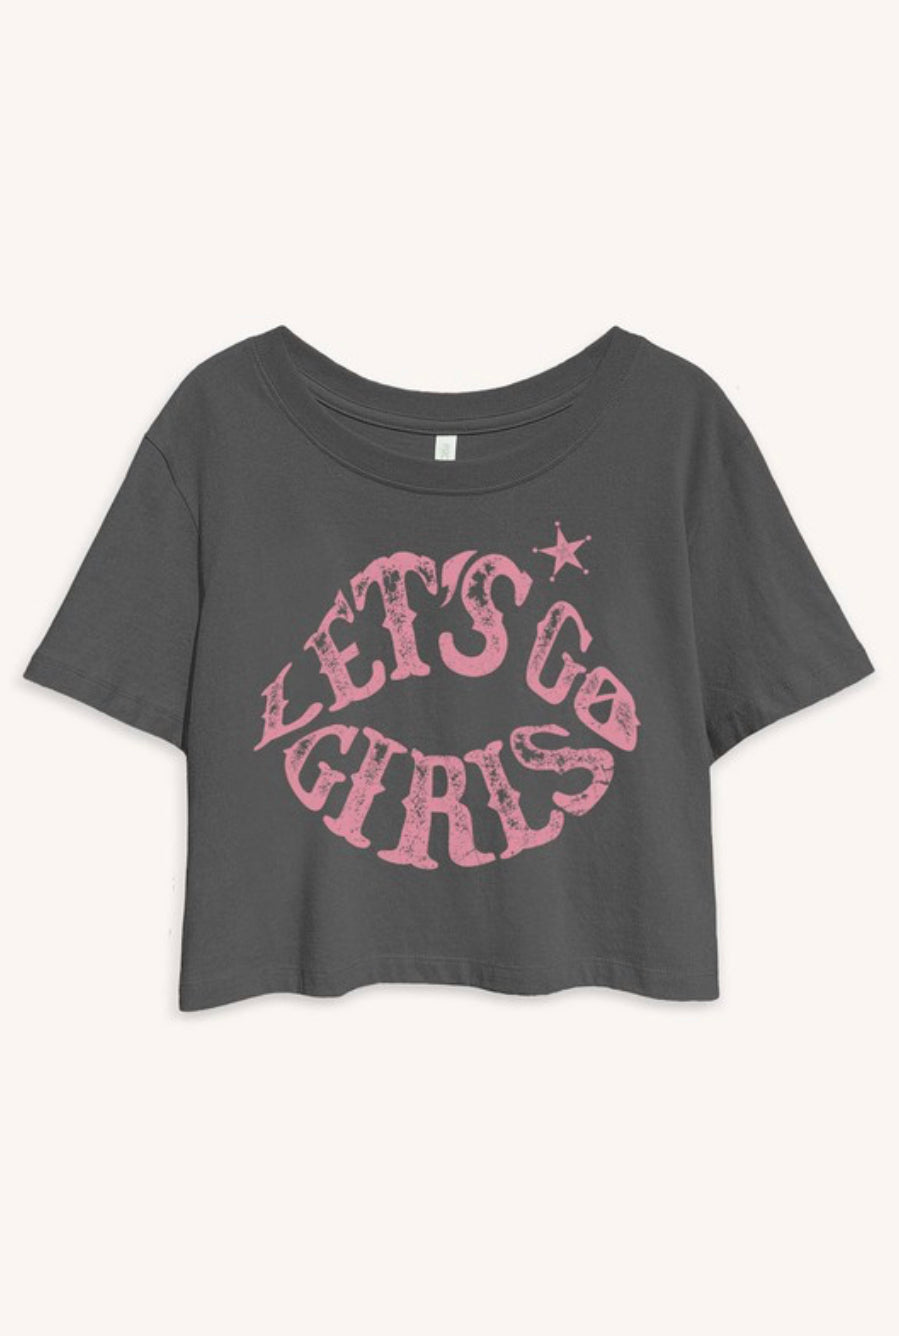 Let’s Go Girls cropped tshirt